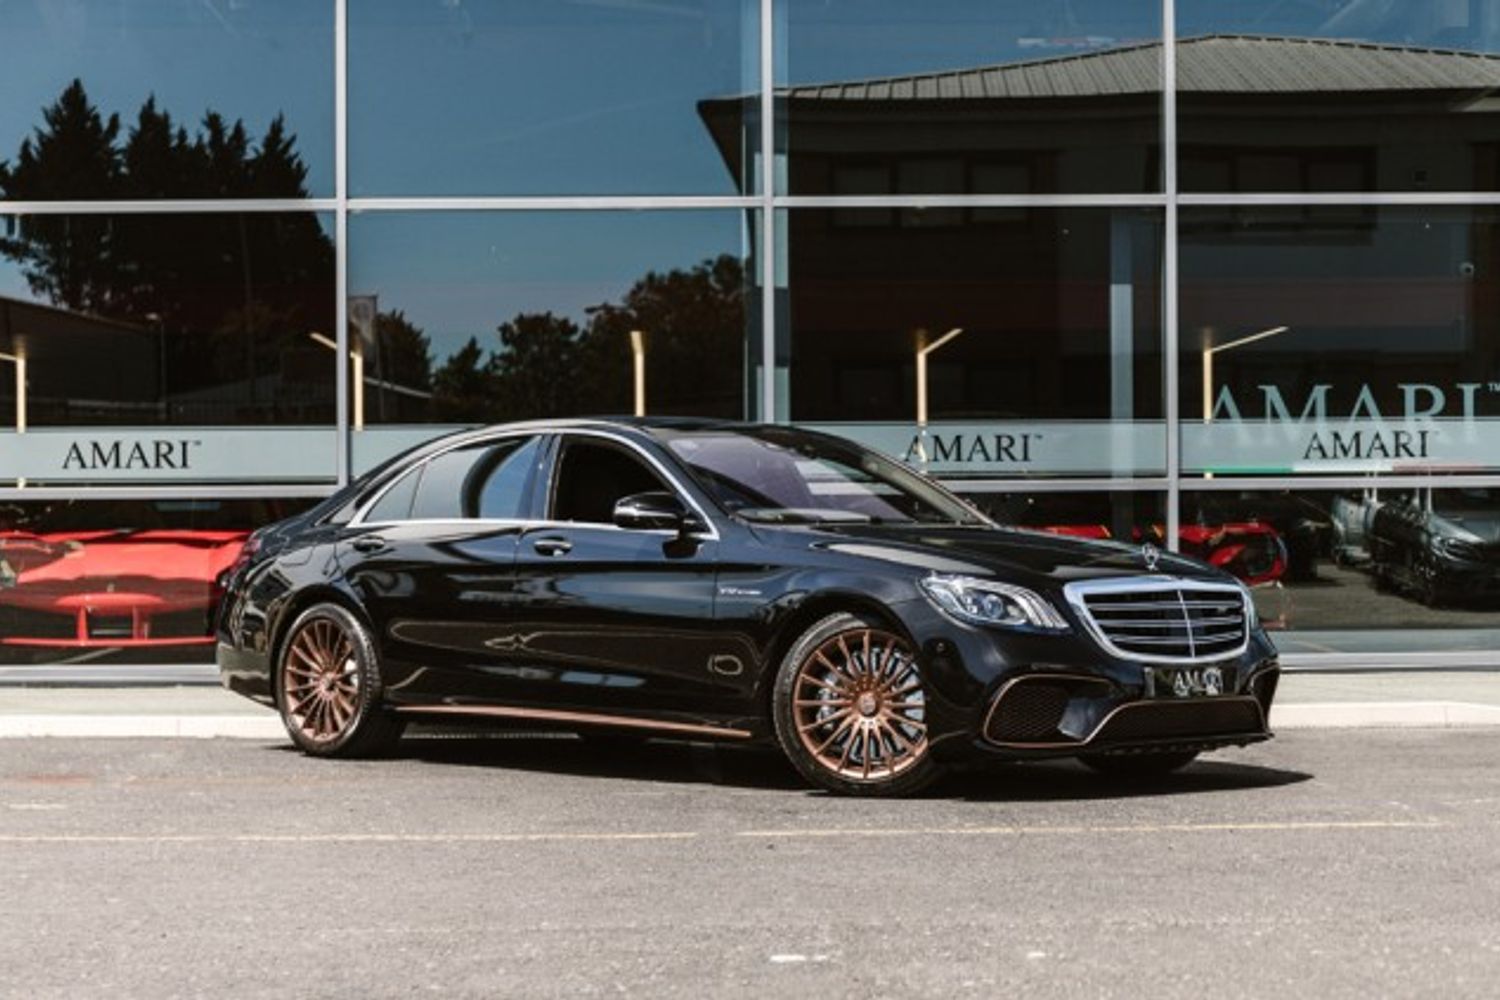 MERCEDES-BENZ S CLASS SALOON 6.0 S65 AMG L 4DR AUTOMATIC